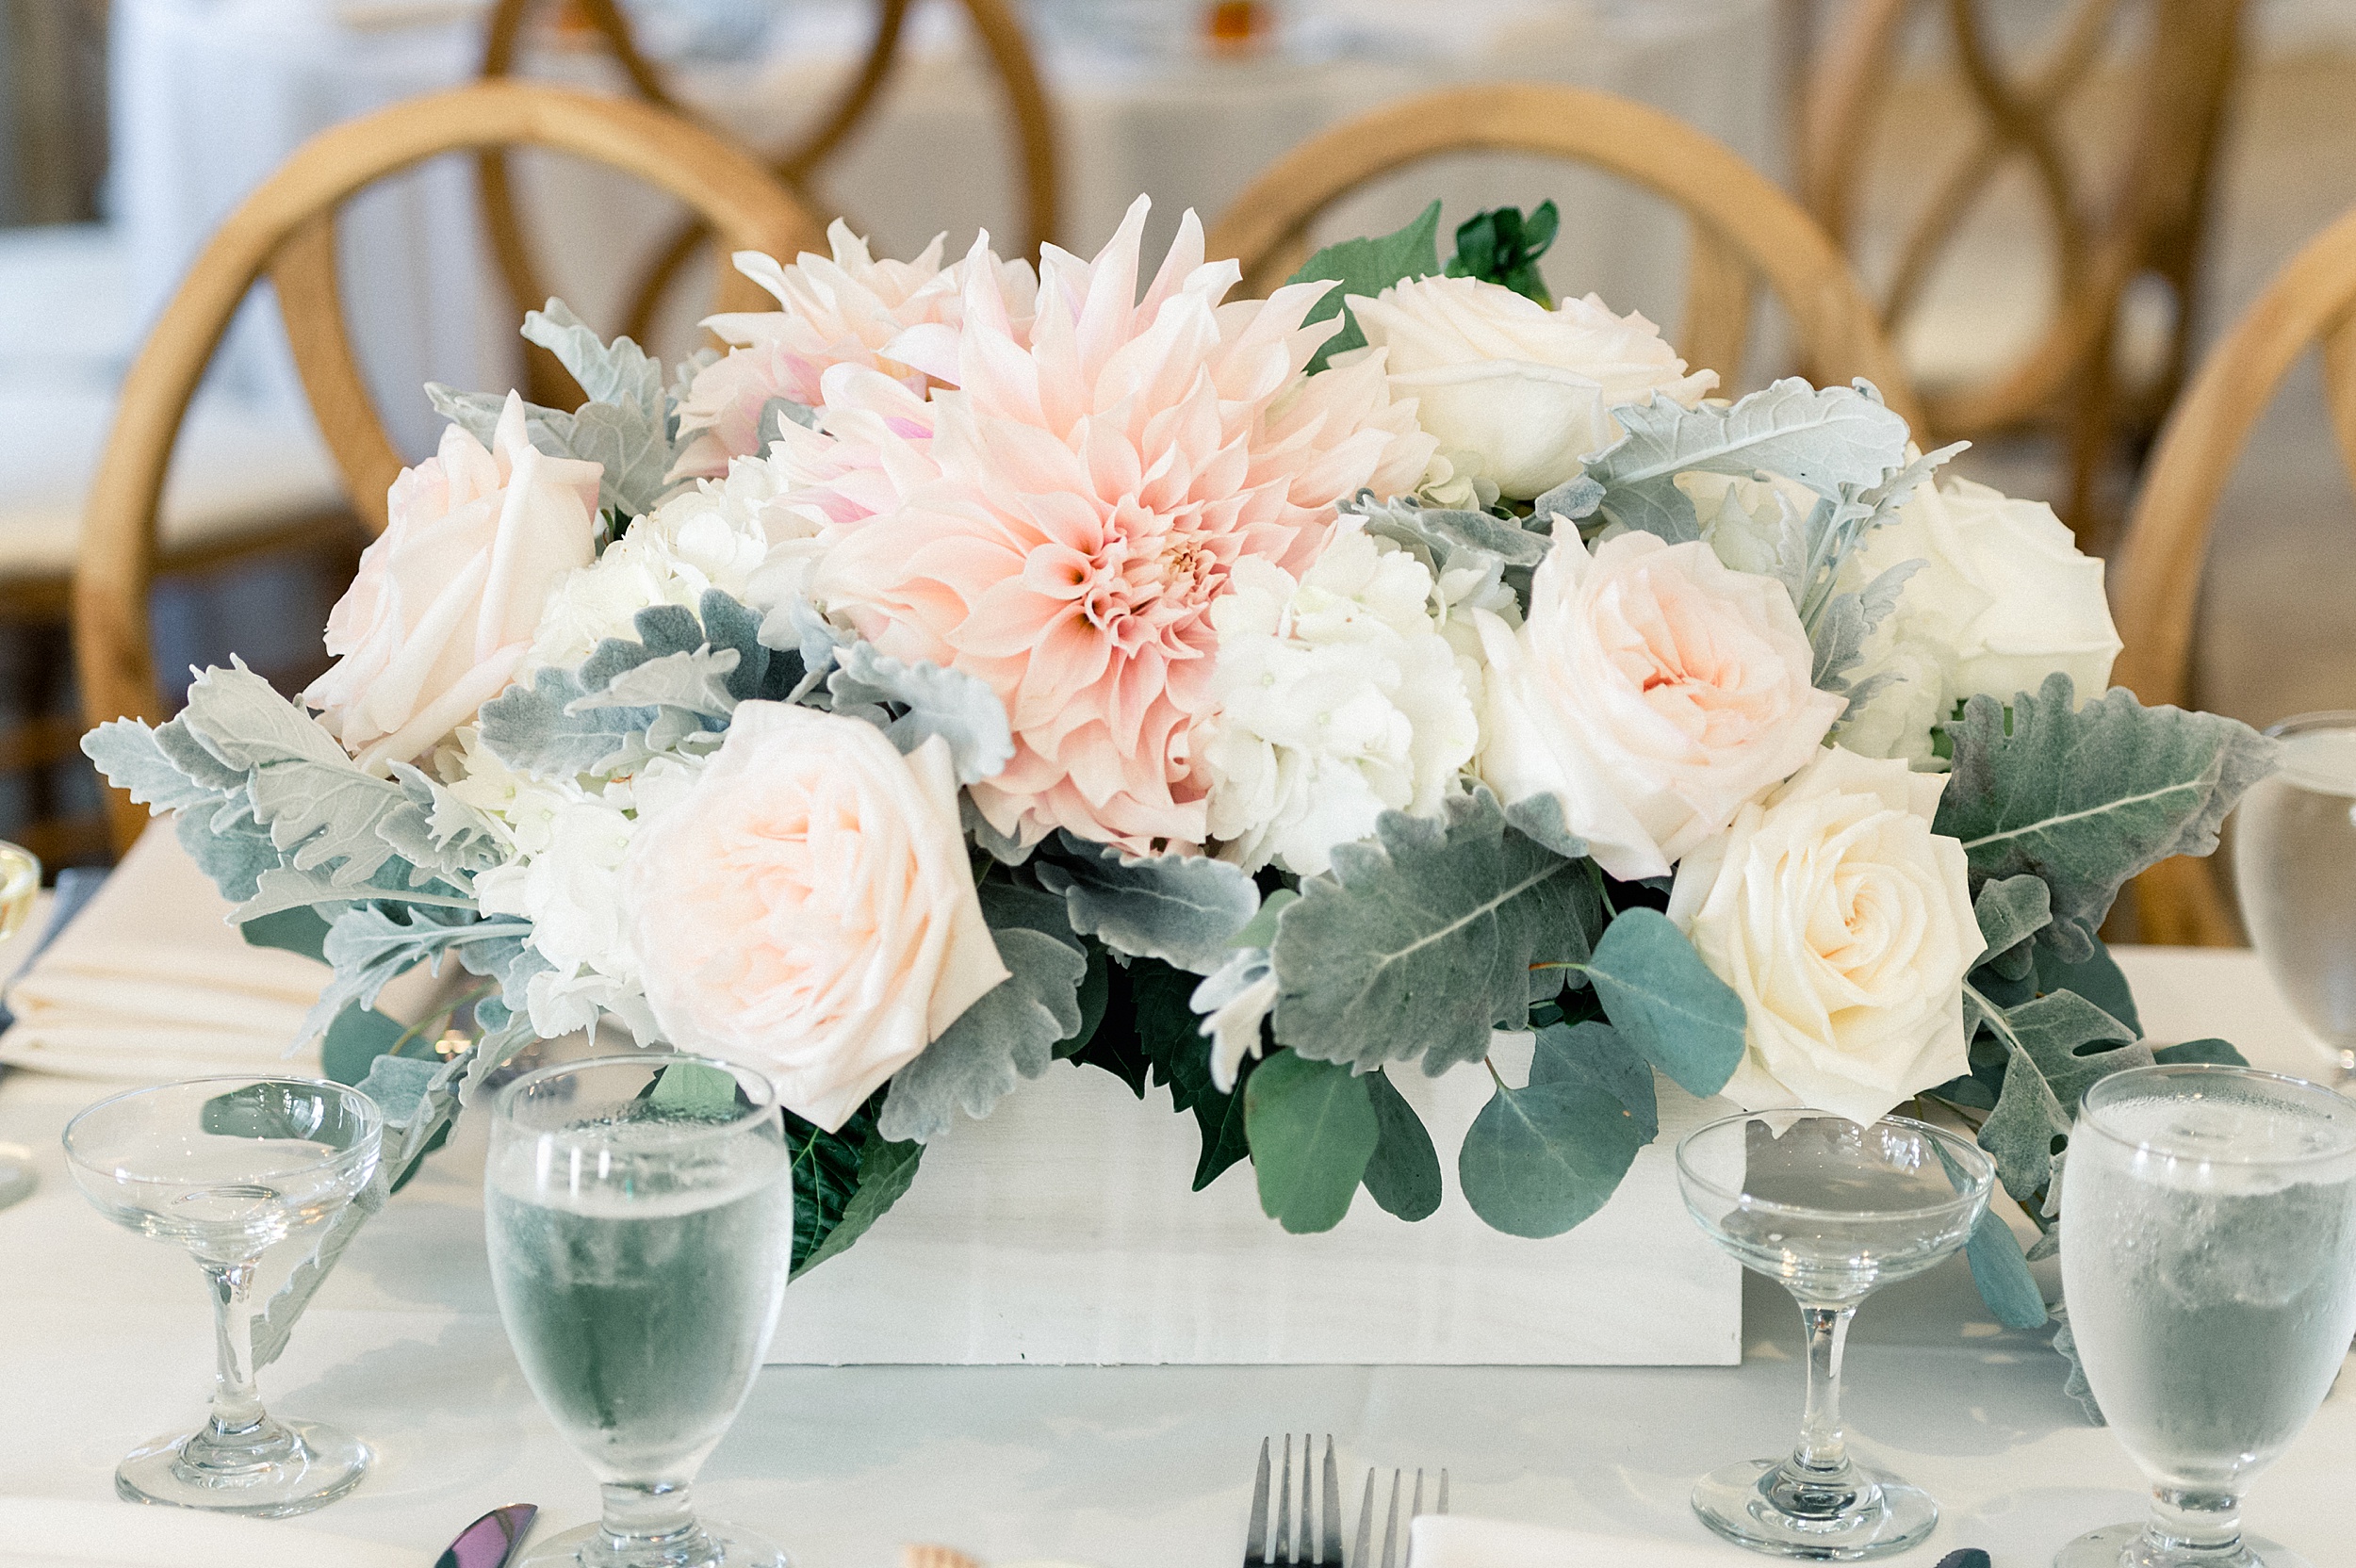 blush and peach hues in white wooden boxes for york harbor inn wedding reception centerpieces